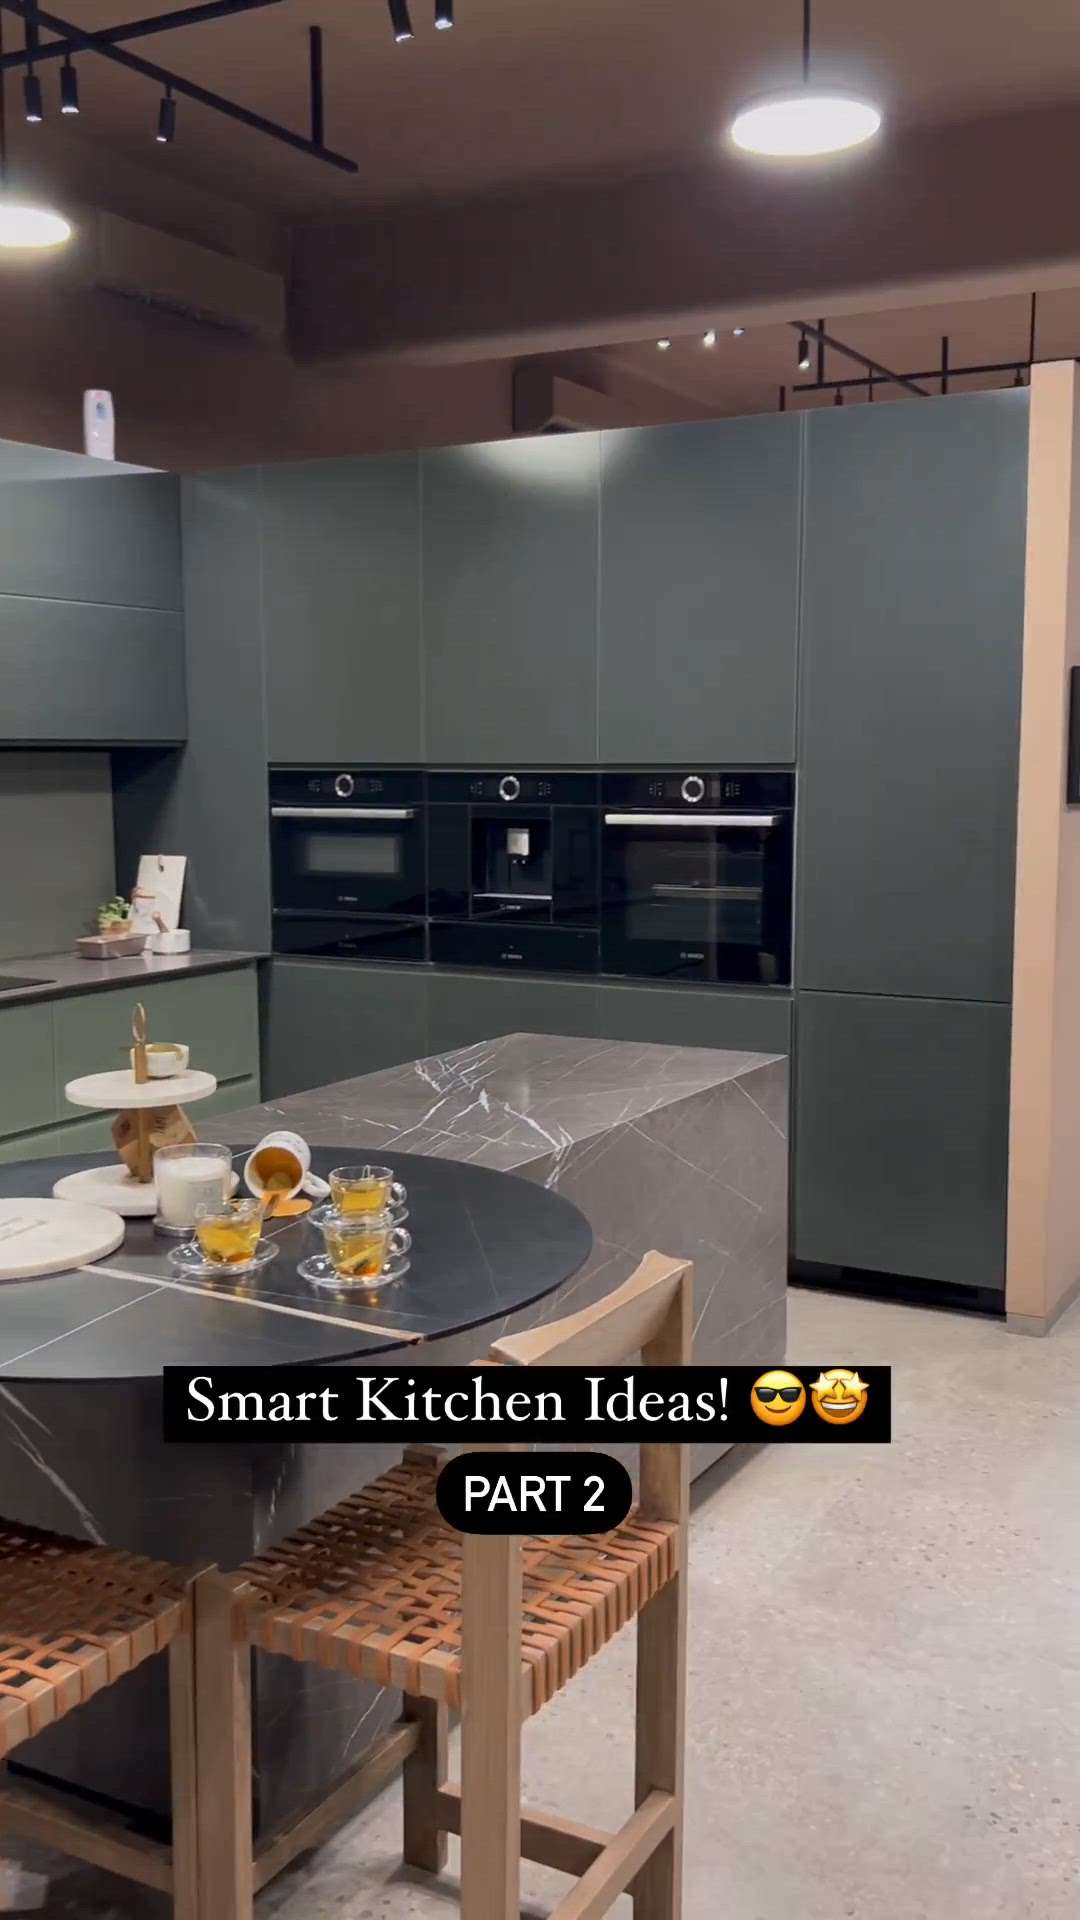 Looking for one-stop interior design solutions for your dream home or office? 😍
At Lilac Interior, we don't just build homes but craft your desires into fresh designs to make you fall in love with your home! ✨
Get your dream home designed by us 💫furniture
📩 Comment or DM ' smart ' to order
📞Contact - 7701821801, 7000706455
💻 https://lilacinterior.com
Follow 👉@lilac_interior
Follow👉 @lilac_interior
Follow👉 @lilac_interior
➖➖➖➖➖➖➖➖
#interiordesign #designinterior #interiordesigner #designdeinteriores #interiordesignideas #interiordesigners #designerdeinteriores #interiordesigns #interiordesigninspiration
.
.
.
#memeindian
#memesociety
#indianjoke
#desitrolls
#idioticsperm
#interiordesign #designinterior #interiordesigner #designdeinteriores #interiordesignideas #interiordesigners #designerdeinteriores #interiordesigns #interiordesigninspiration #interioresdesign #designdeinterior #interiorsdesign #designerinteriors